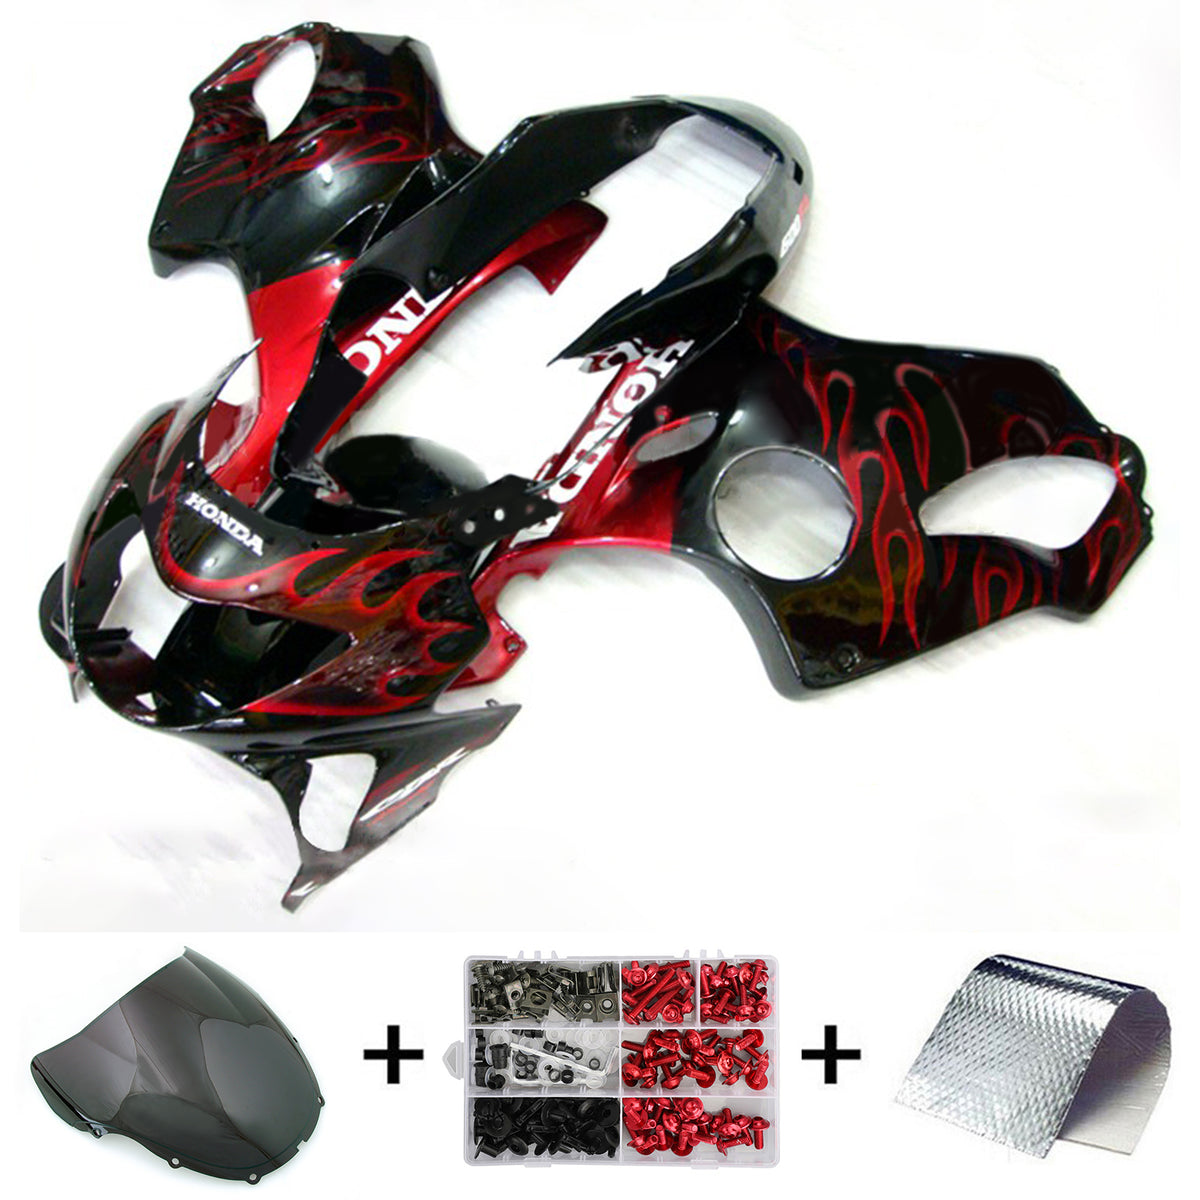 Amotopart 1999-2000 CBR600 F4 Honda Black with Red Flame Fairing Kit